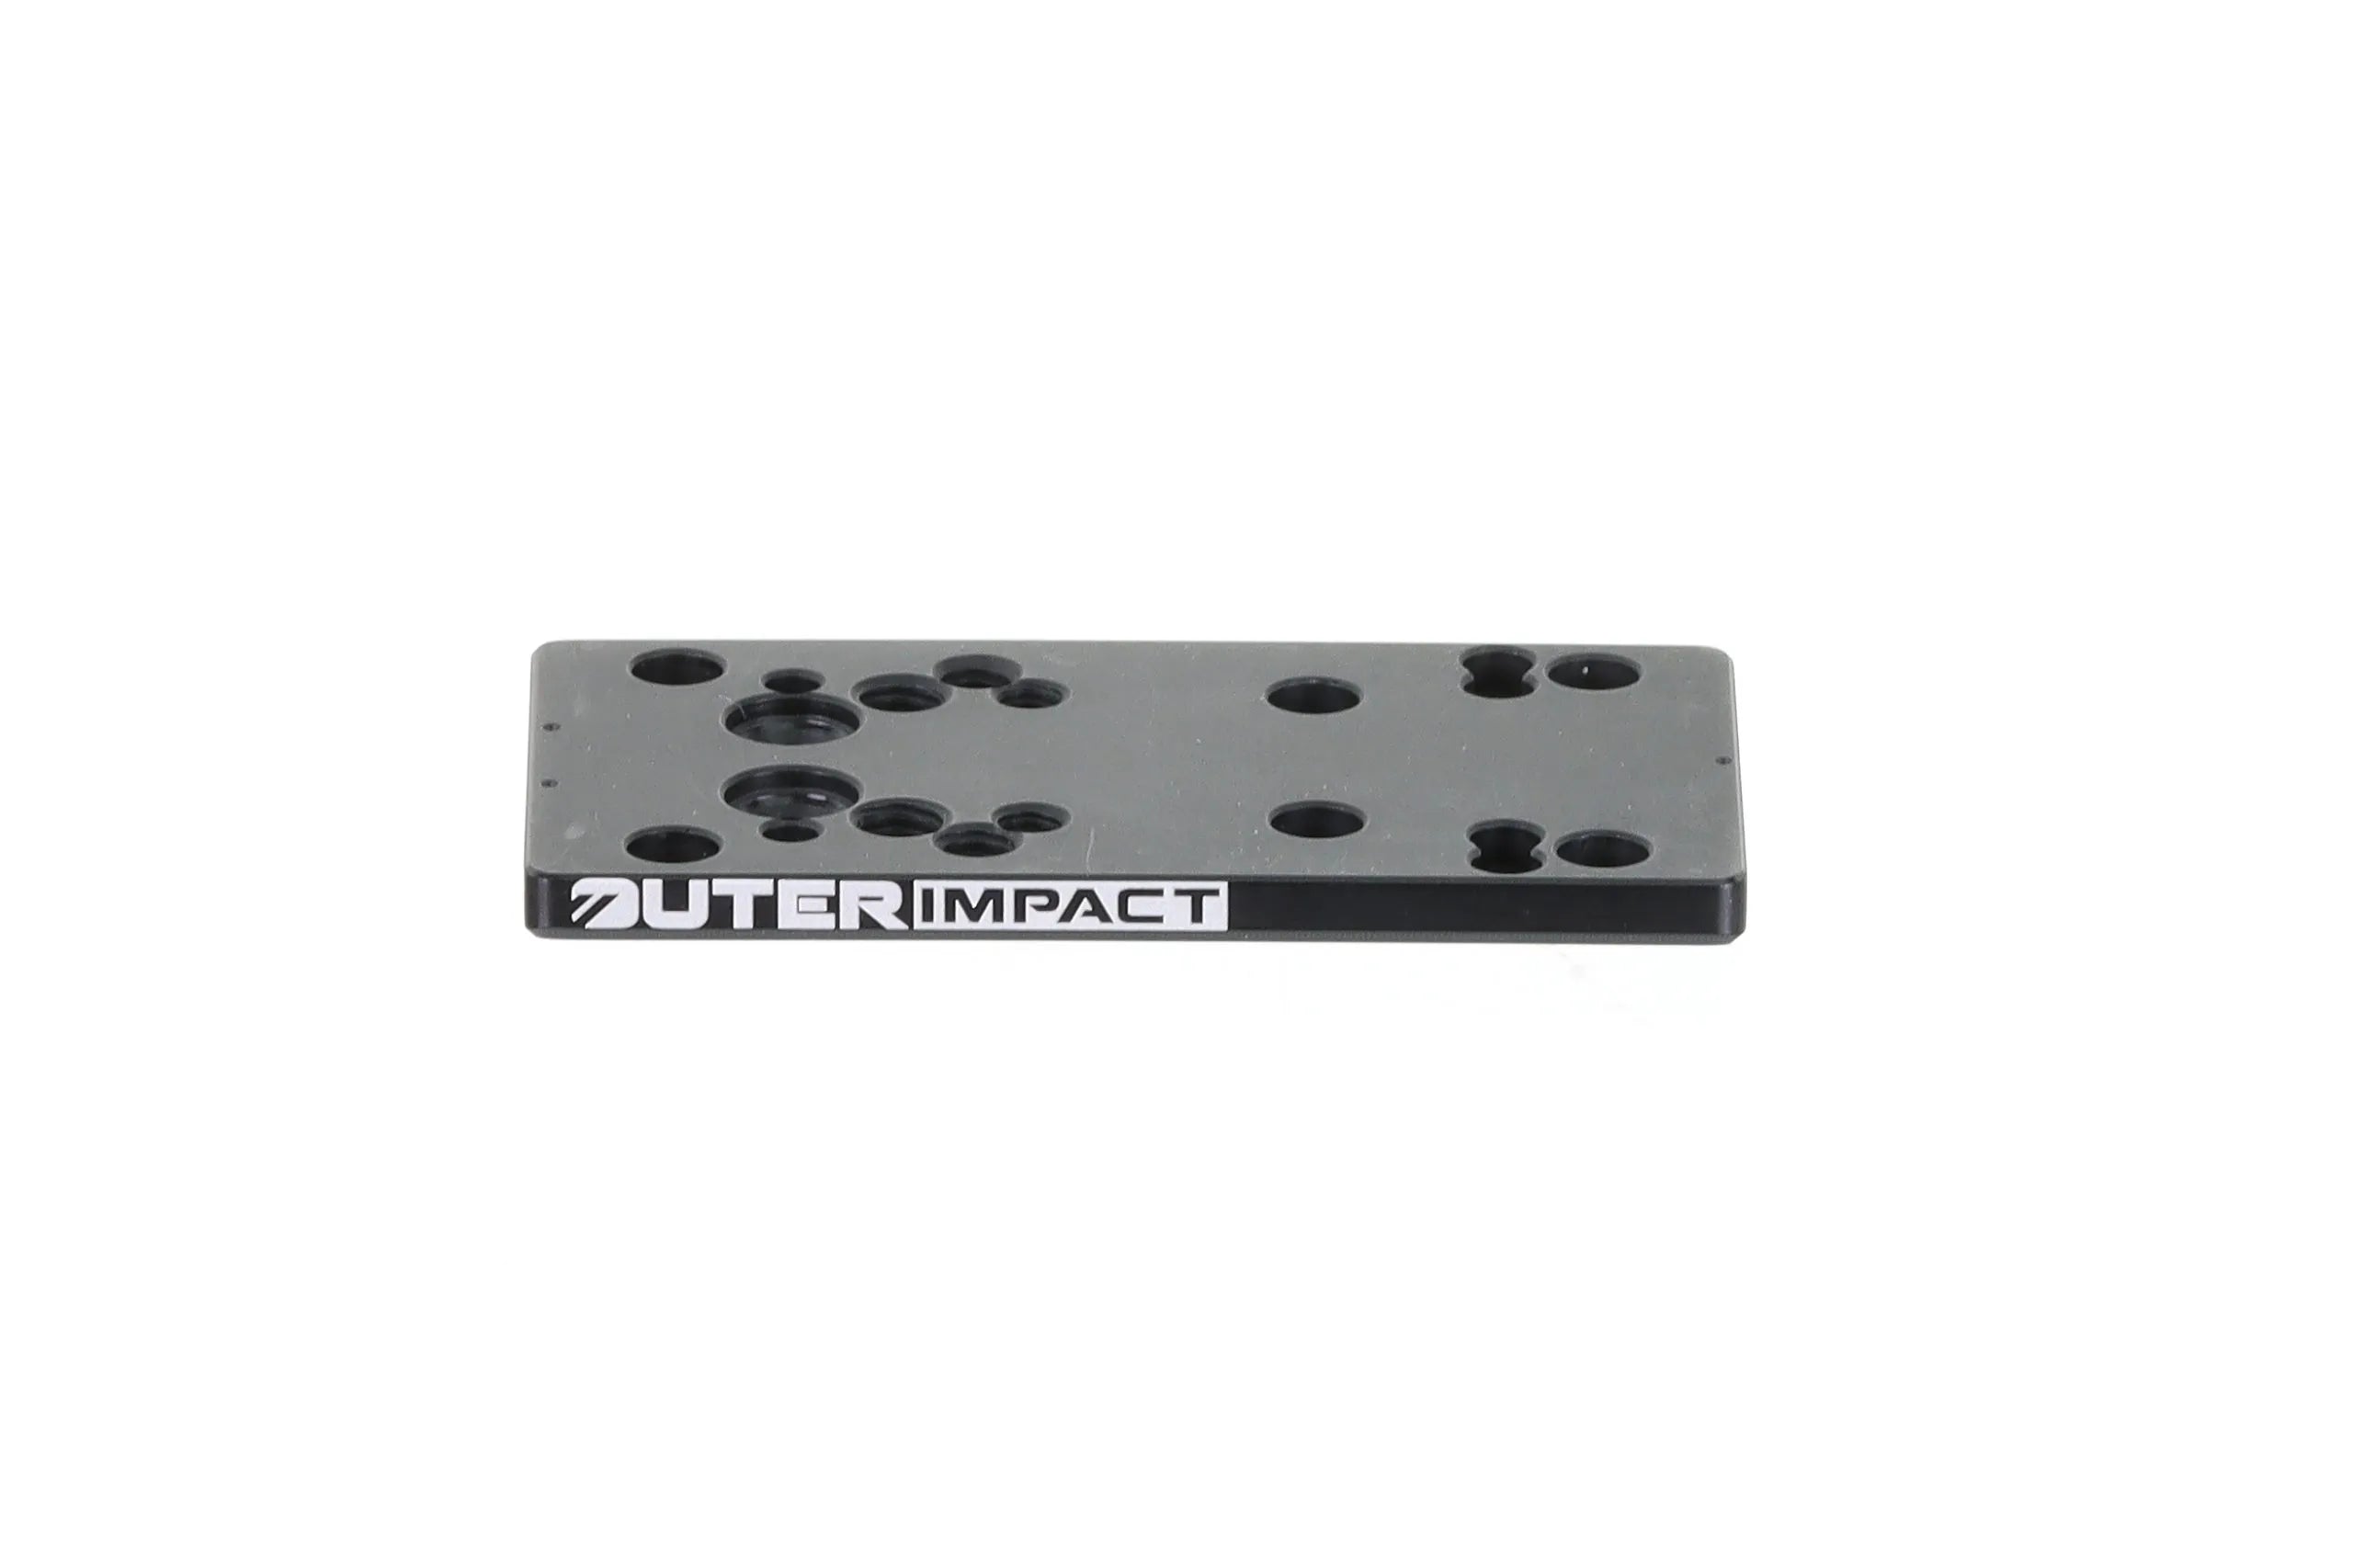 Springfield Armory XD Pistol Red Dot Adapter Mount Plate - OuterImpact